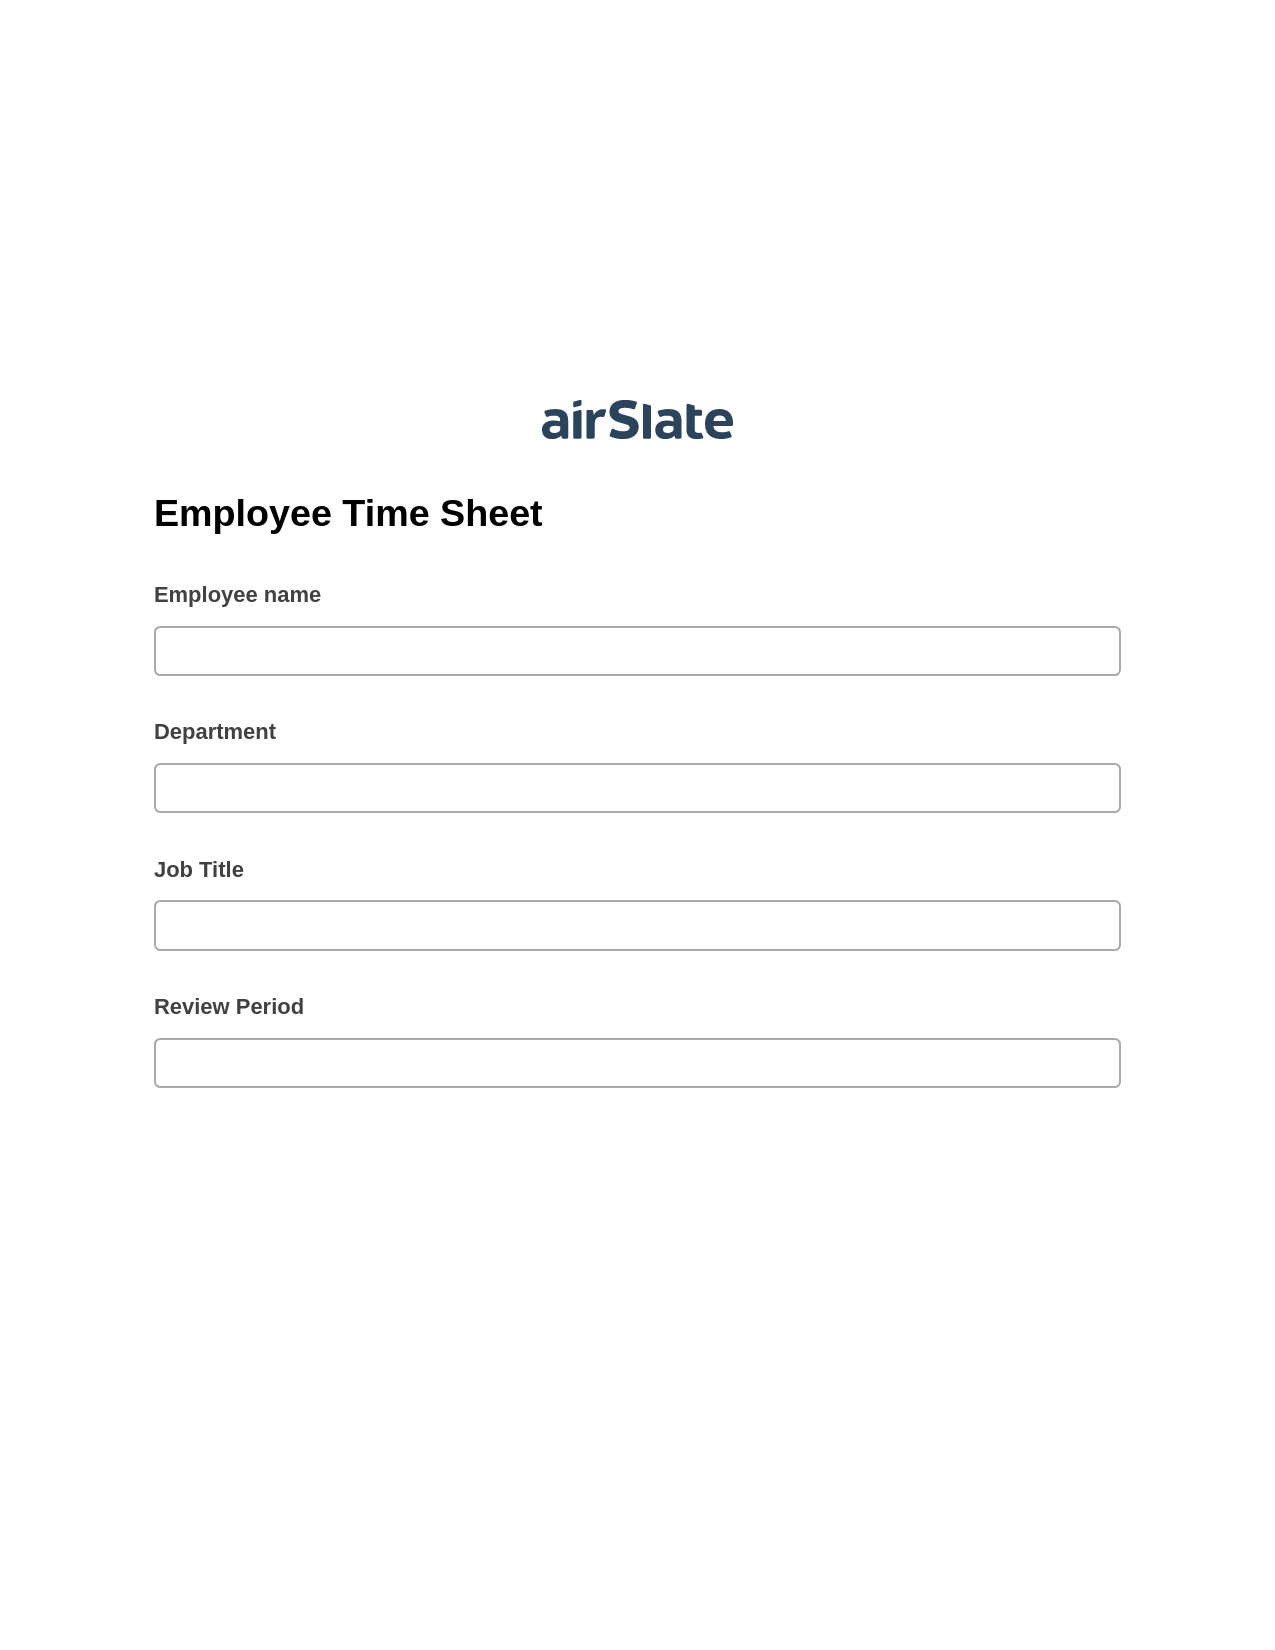 Employee Time Sheet Pre-fill from Excel Spreadsheet Bot, Custom Field's Value Bot, Email Notification Postfinish Bot